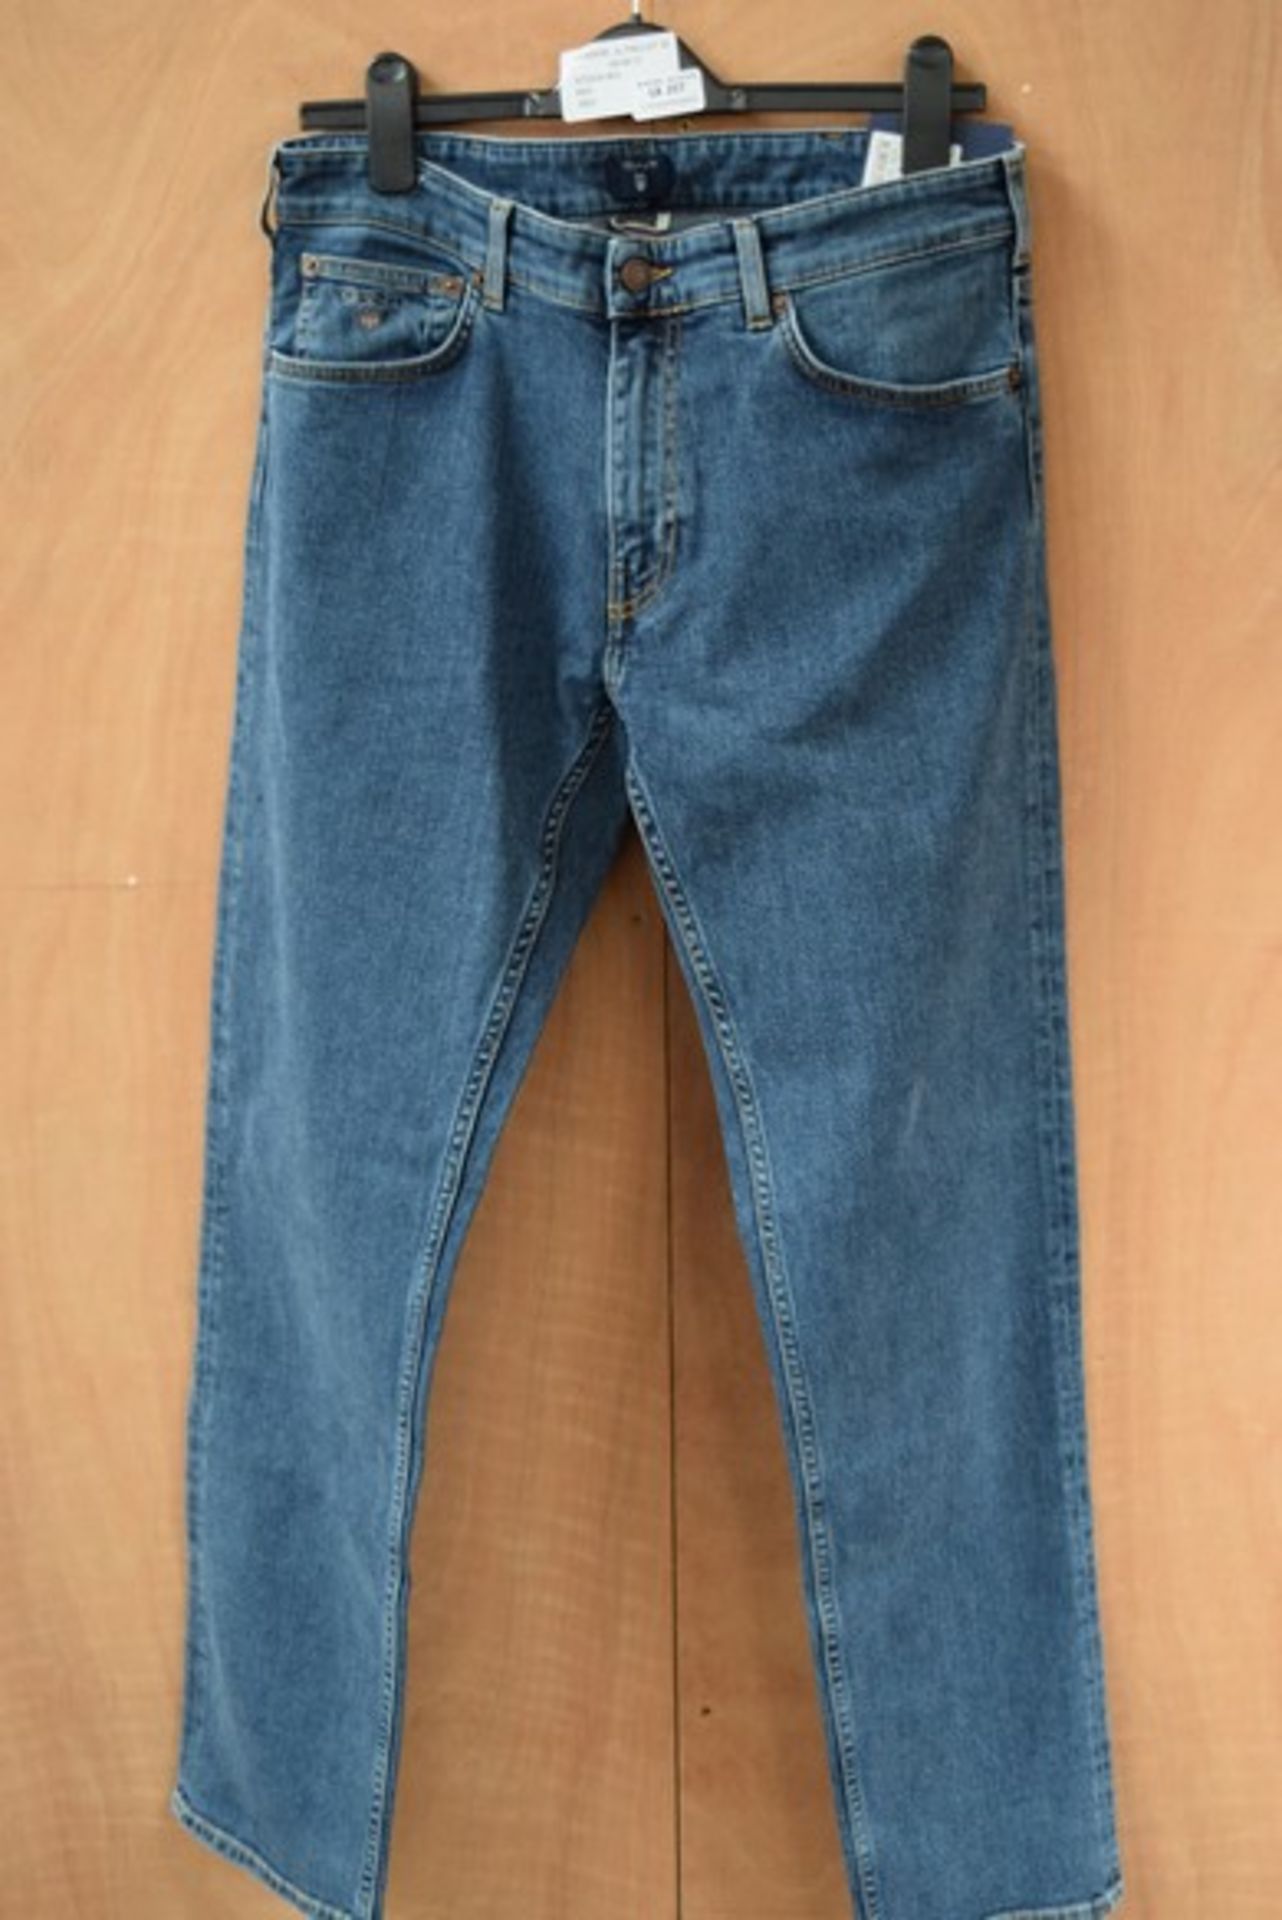 1 x GANT REGULAR FIT JEANS SIZE 32X32 RRP £95 04.08.17 *PLEASE NOTE THAT THE BID PRICE IS MULTIPLIED